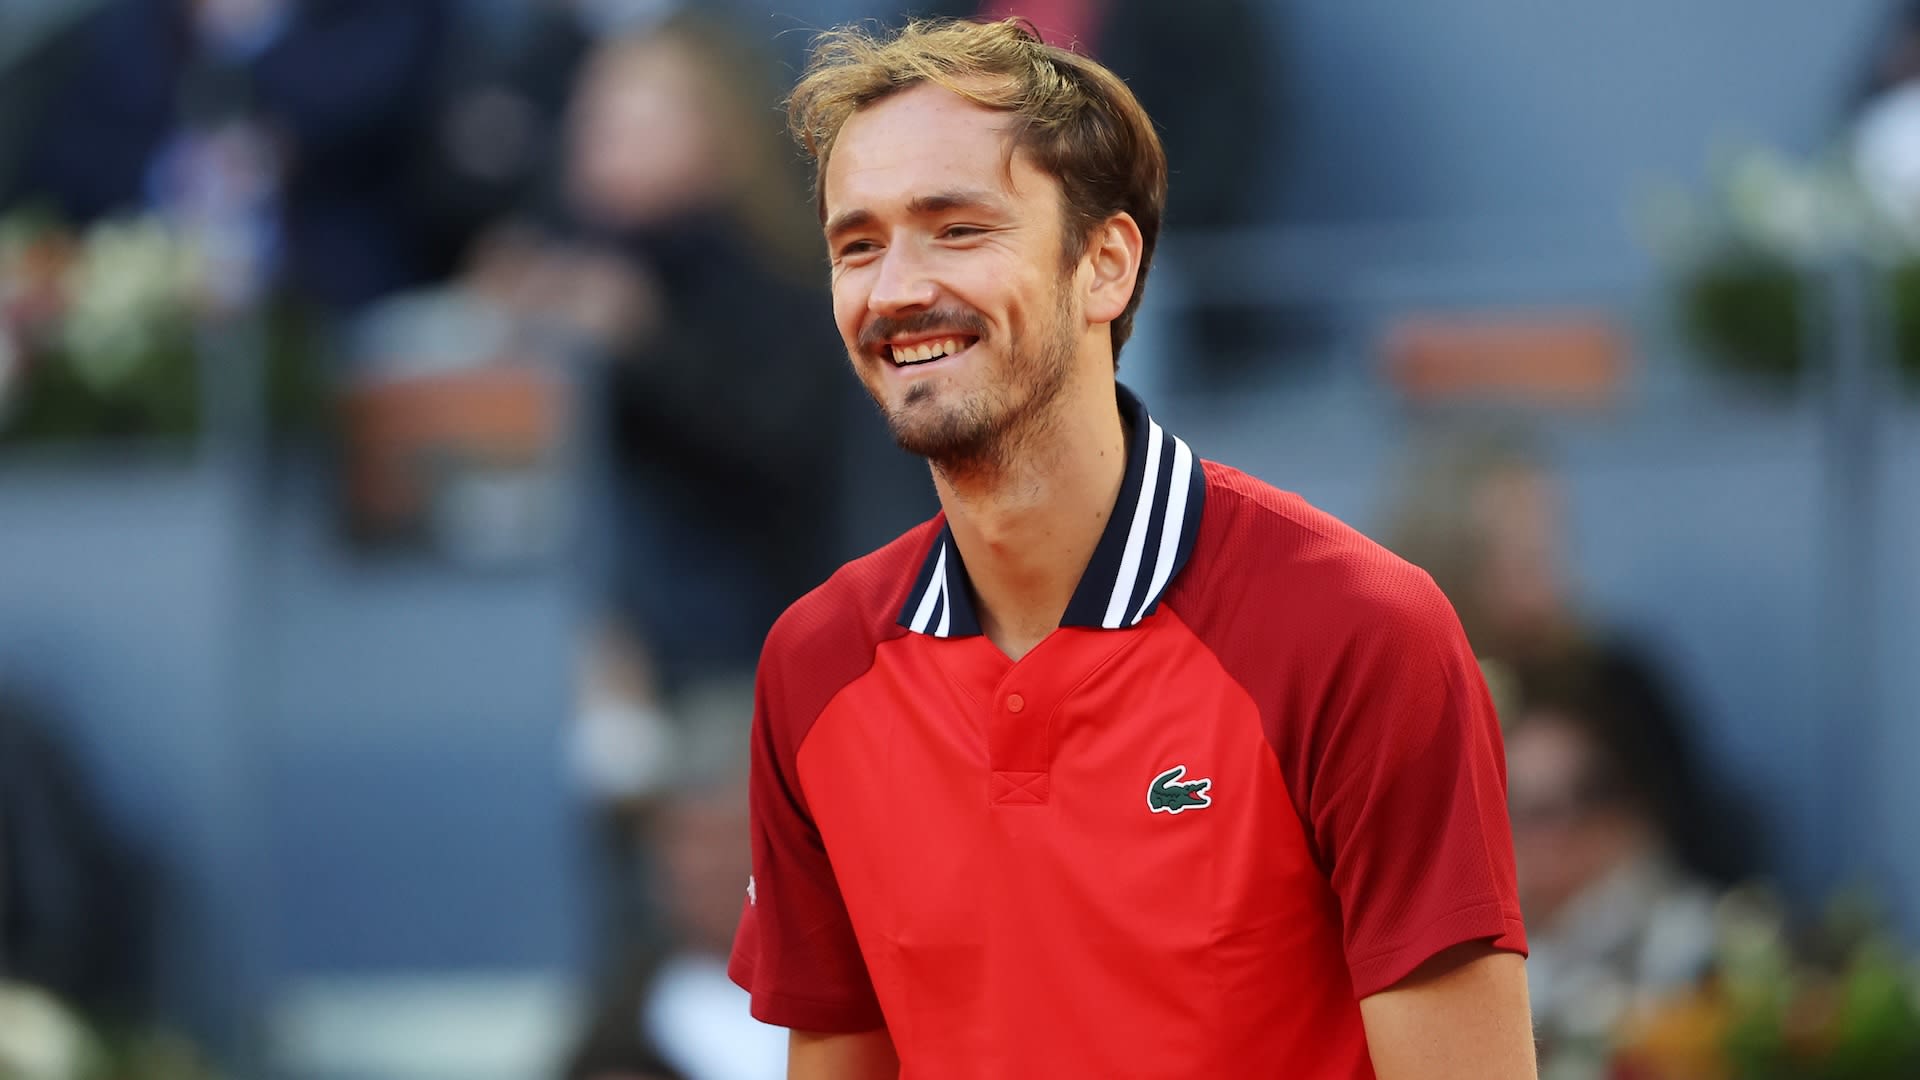 Daniil Medvedev embraces role as defending champion in Rome, shakes off Madrid injury | Tennis.com